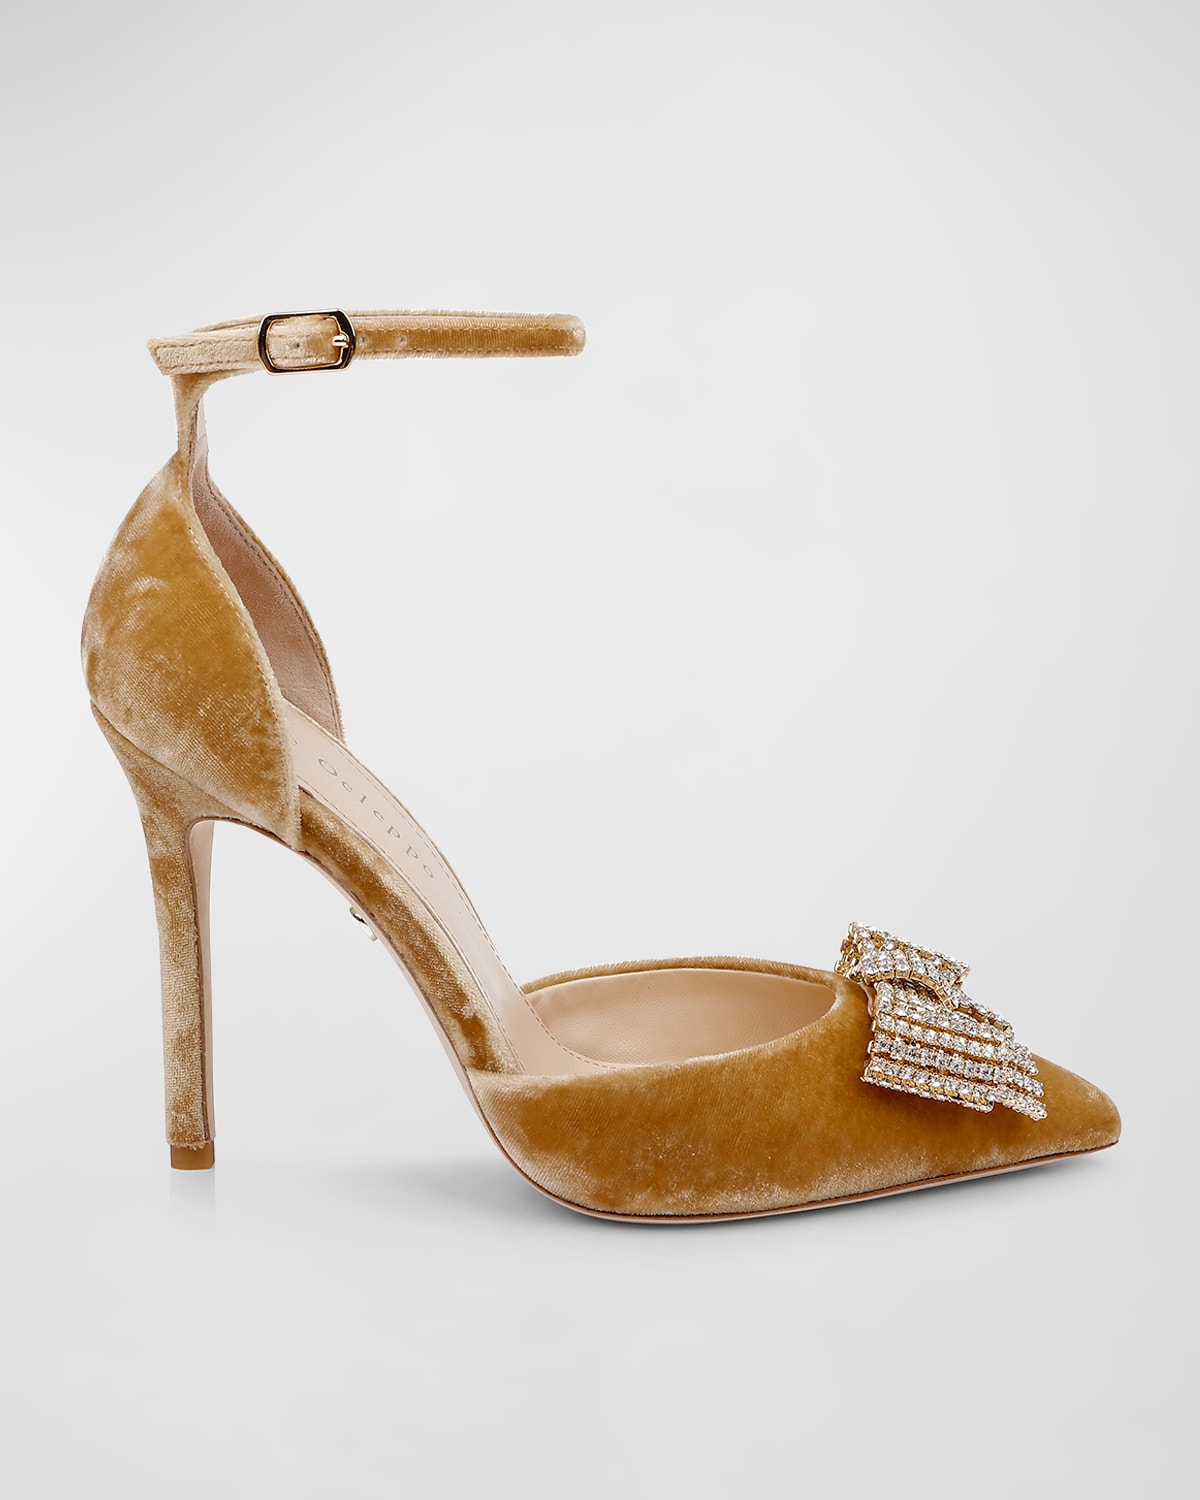 DEE OCLEPPO PLUSH CRYSTAL BOW ANKLE-STRAP PUMPS